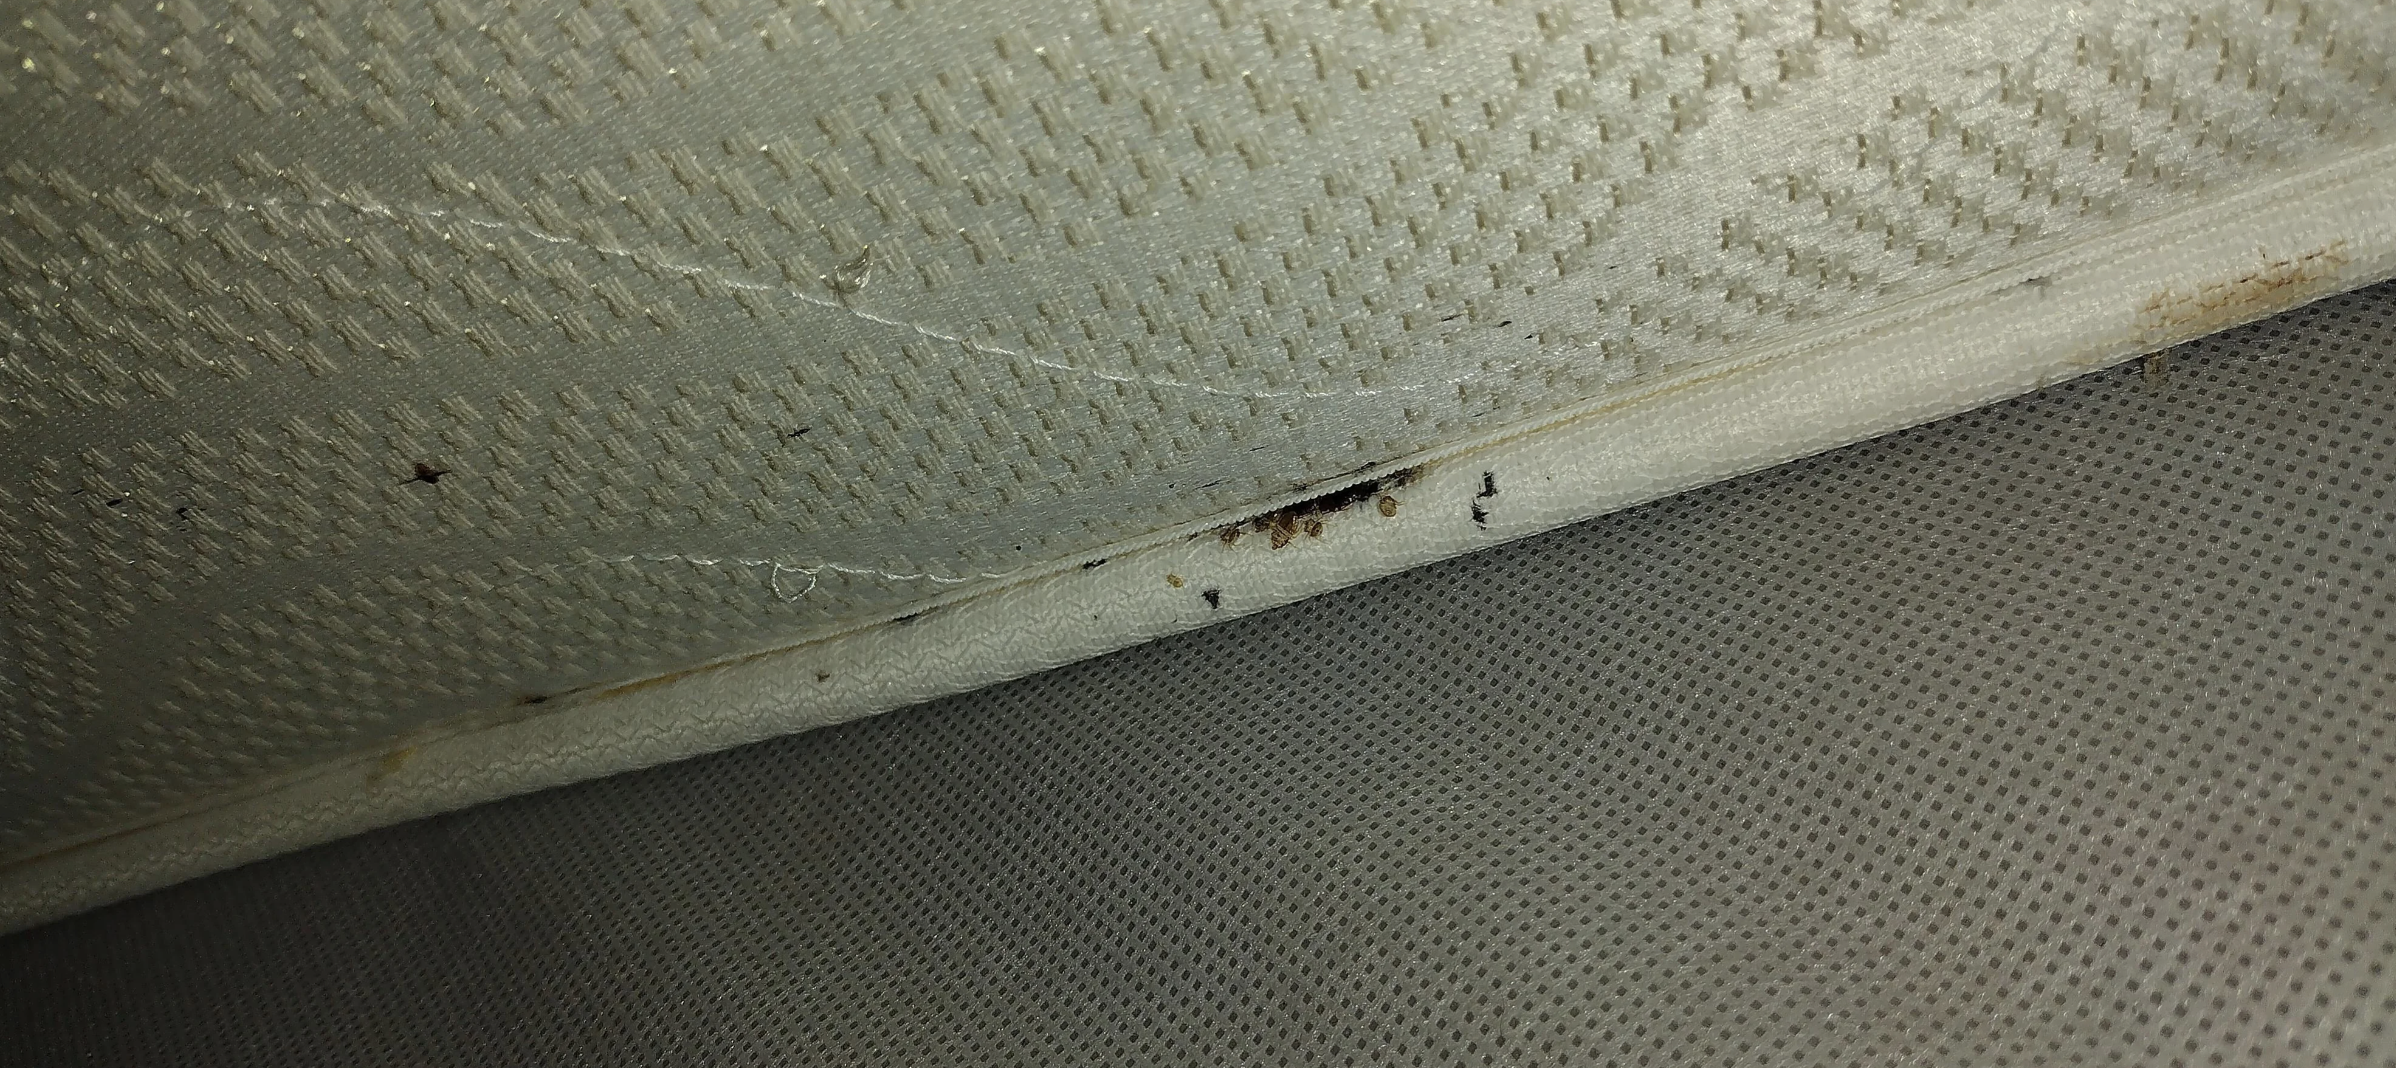 The bottom seam of a mattress, with about a dozen tiny black dots embedded in the seam